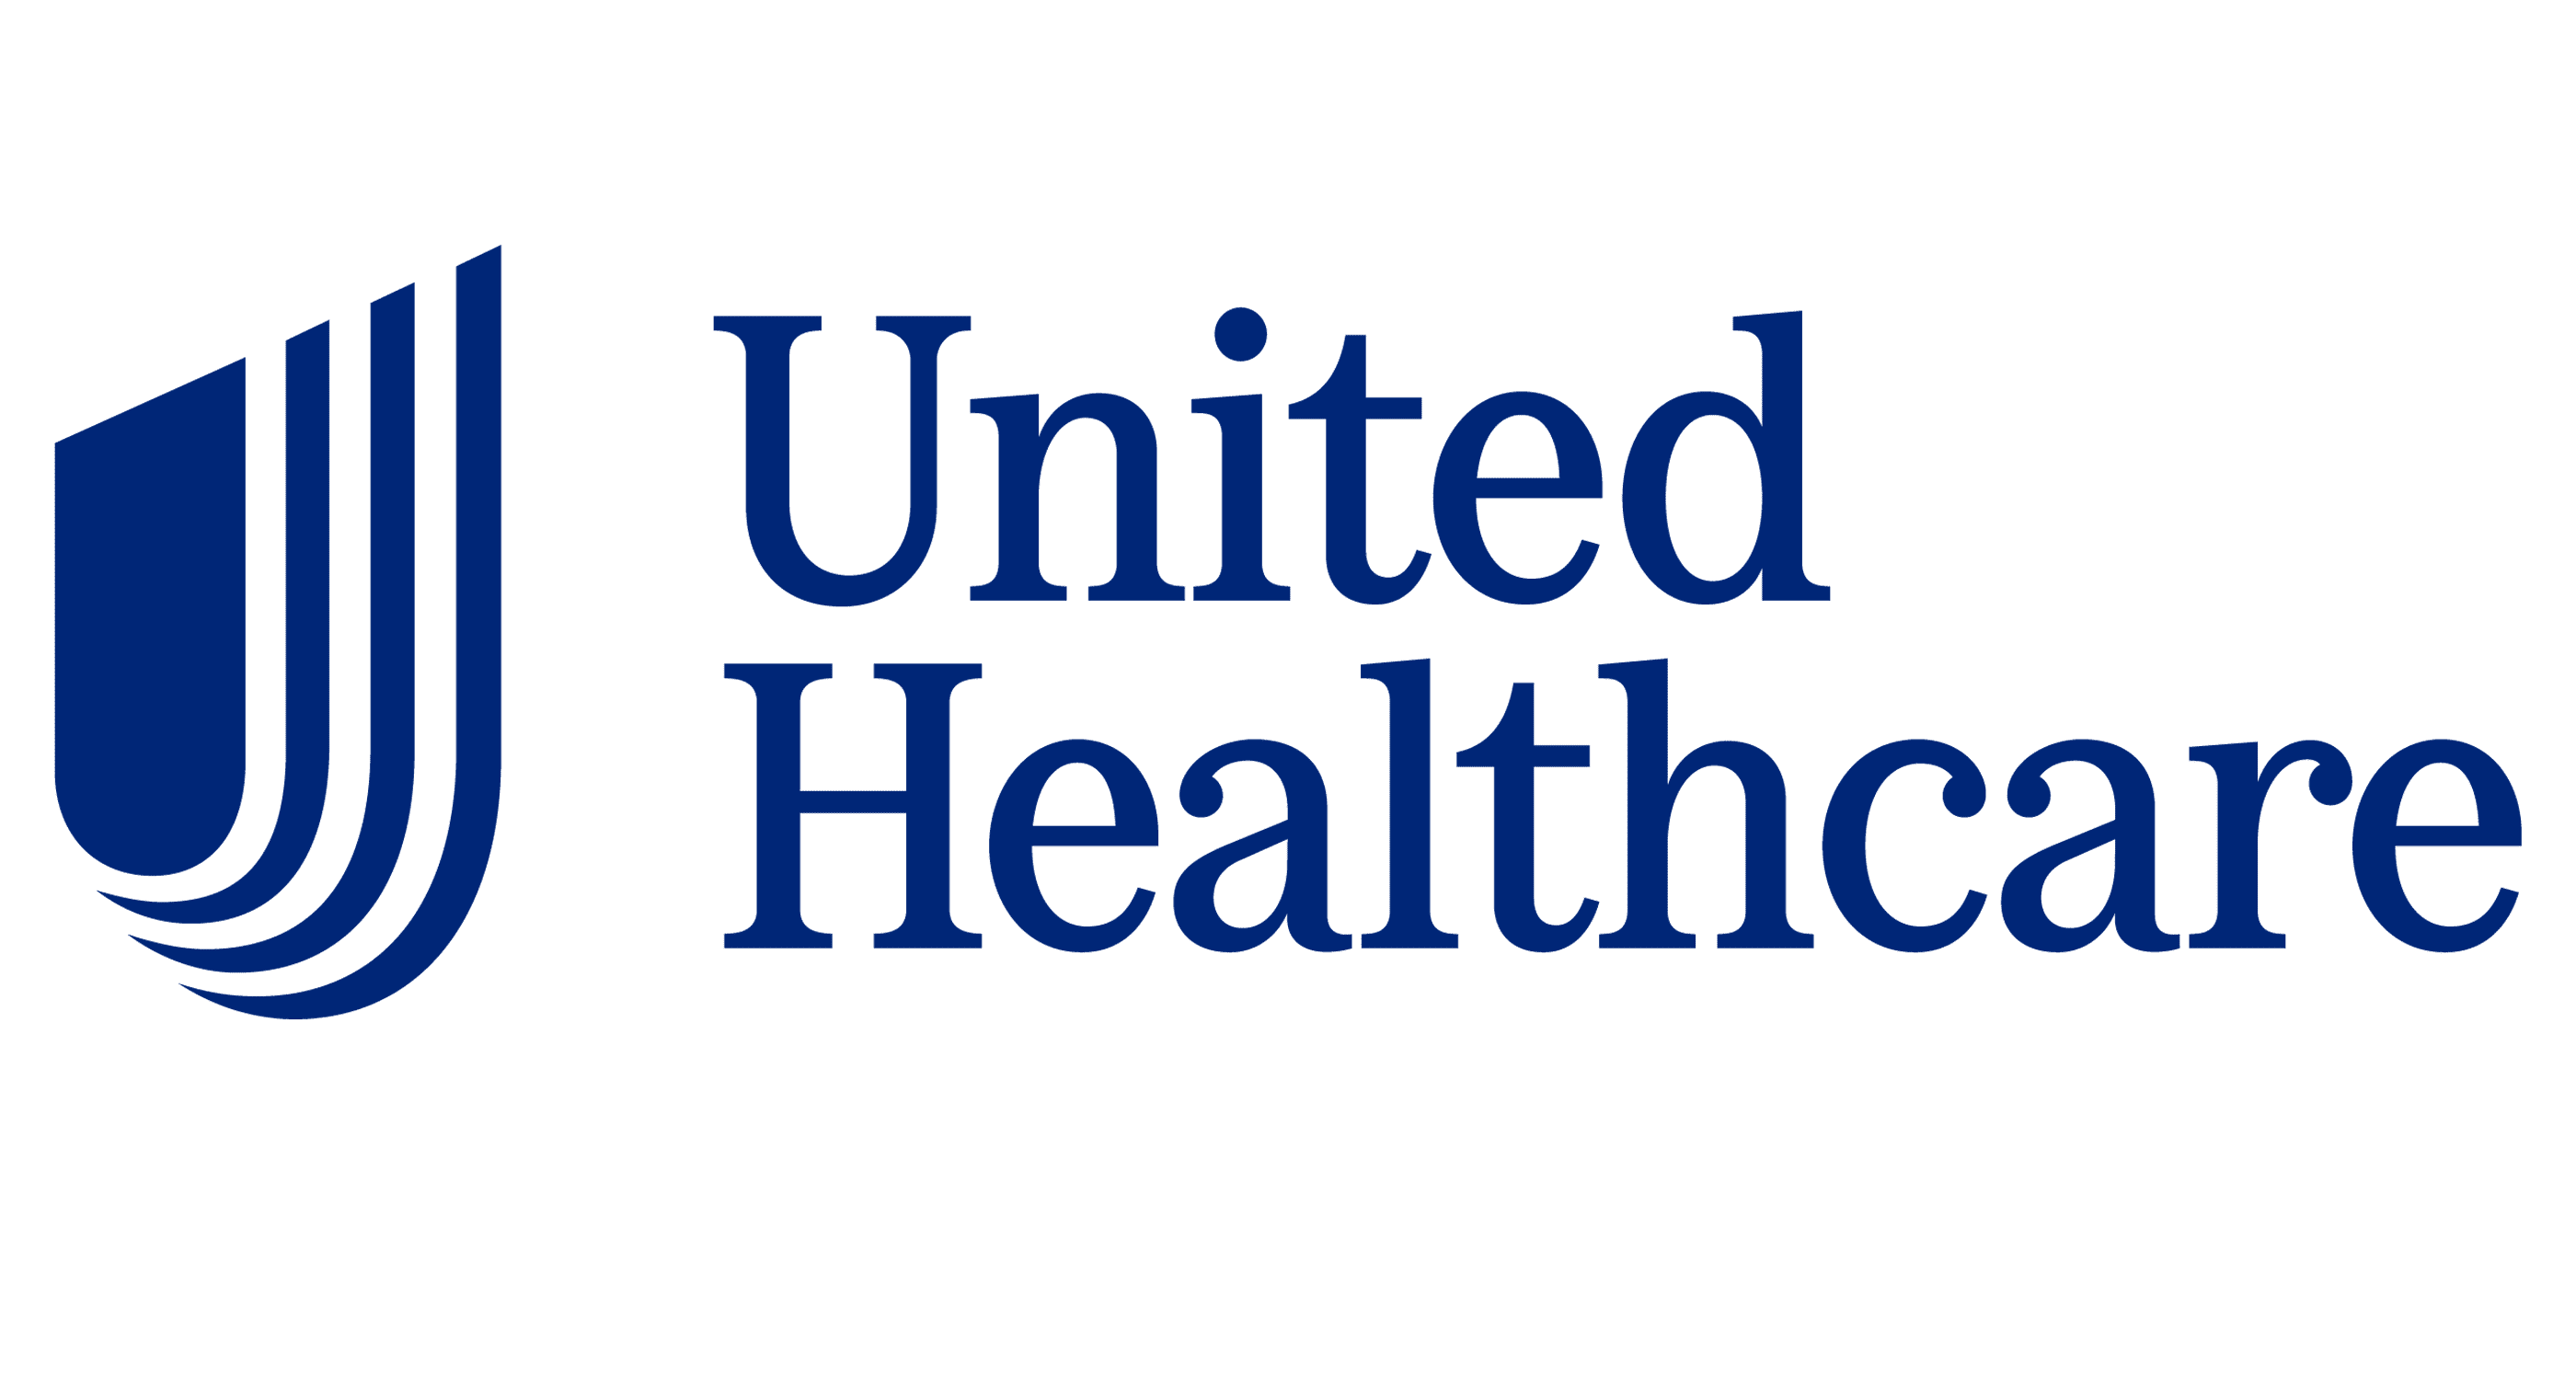 A black background with the words united healthcare written in blue.